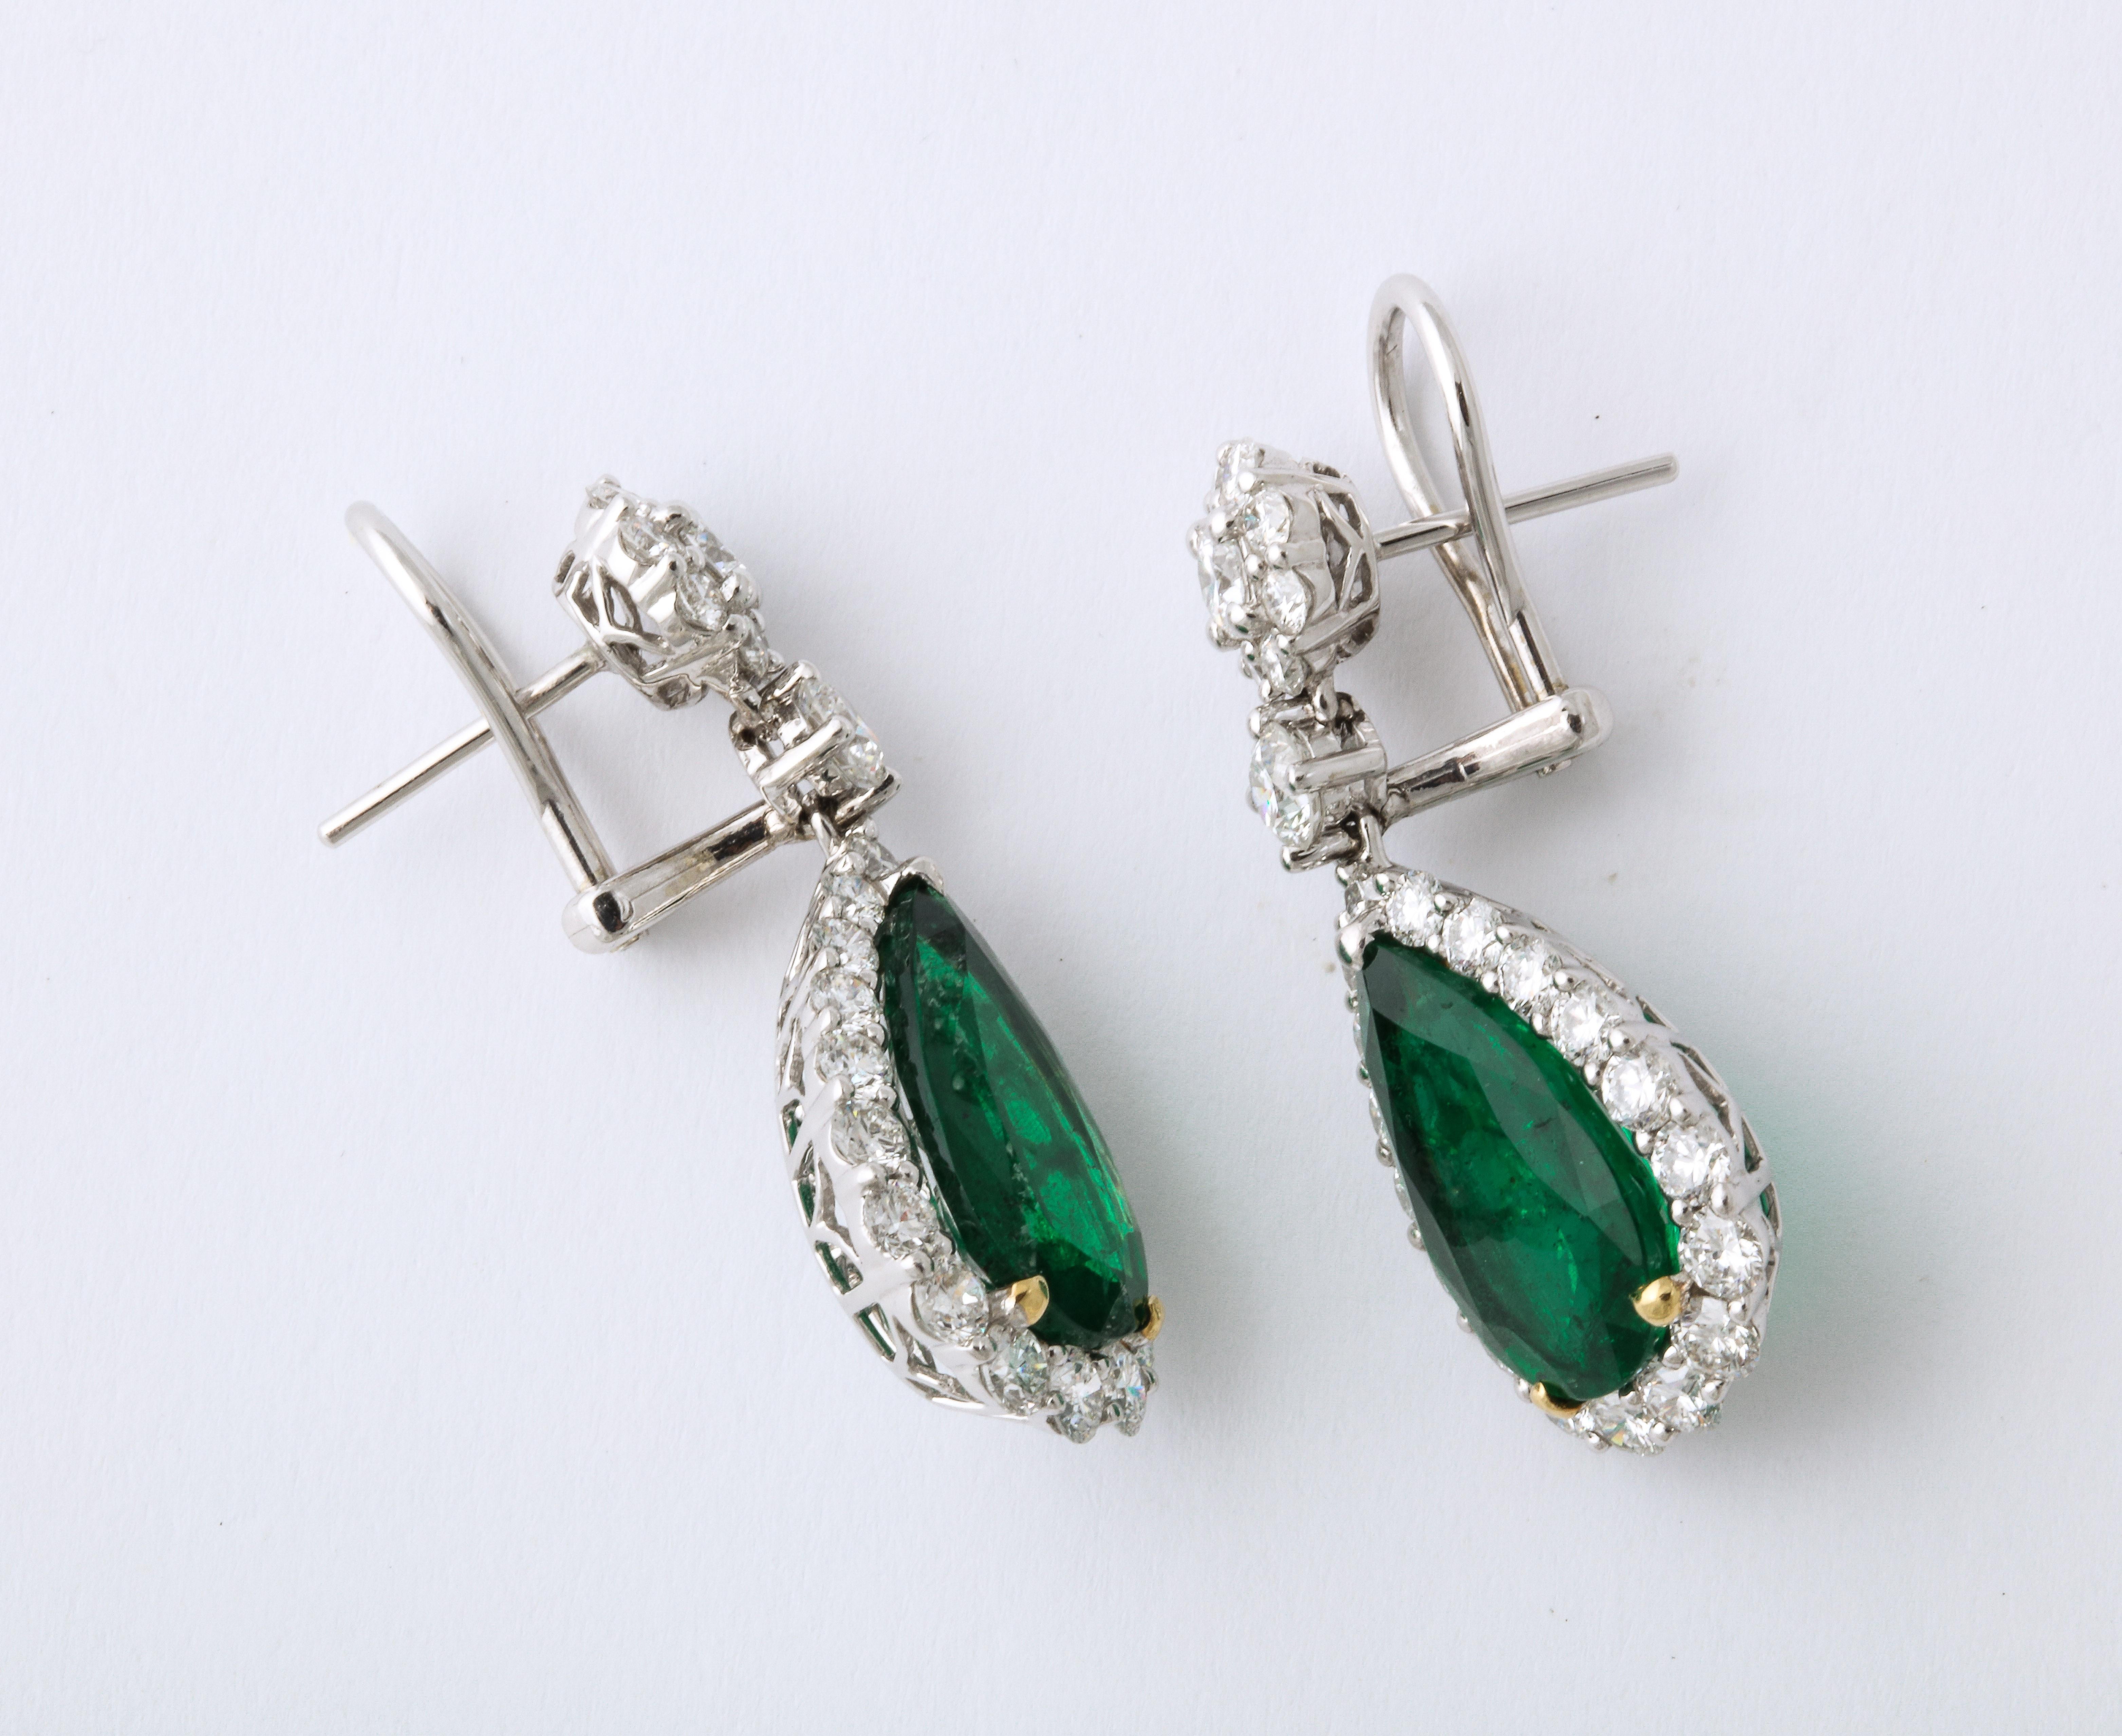 Emerald and Diamond Drop Earrings In New Condition For Sale In New York, NY